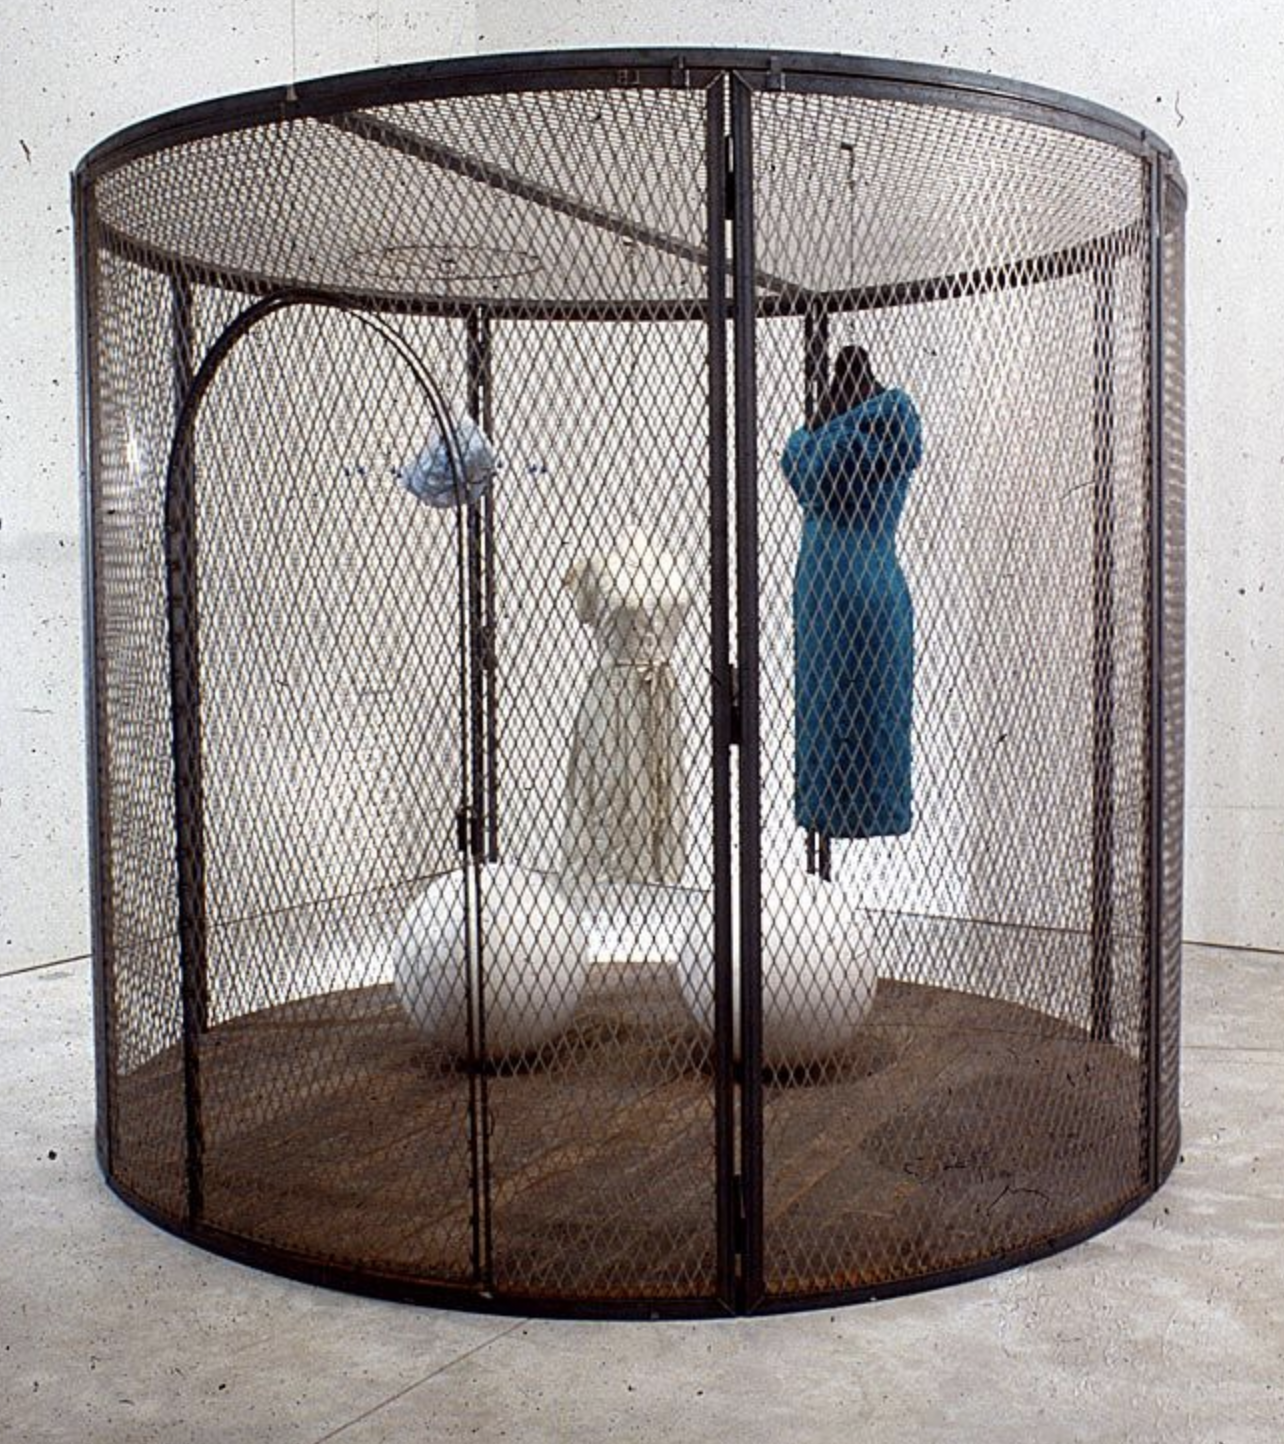 Louise Bourgeois: The Woven Child at the Hayward Gallery, London